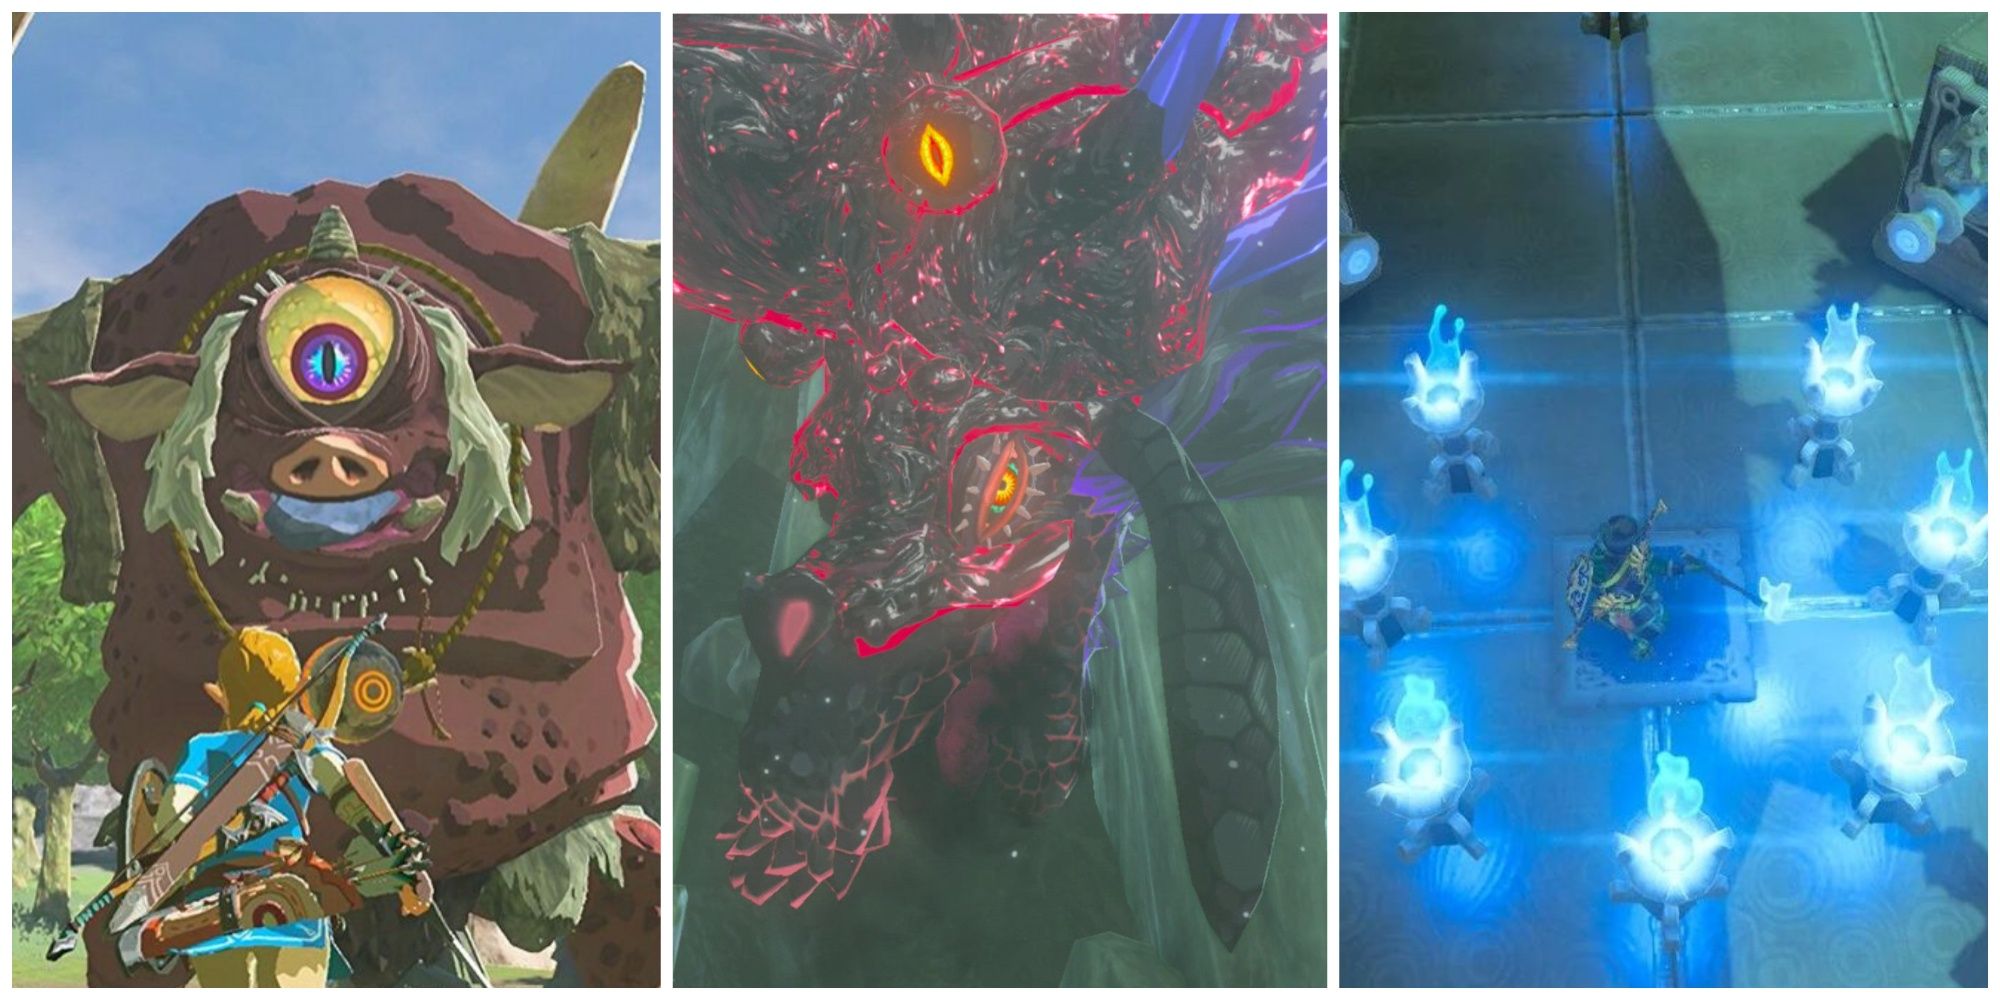 All 136 Shrines in BOTW Complete Guide 